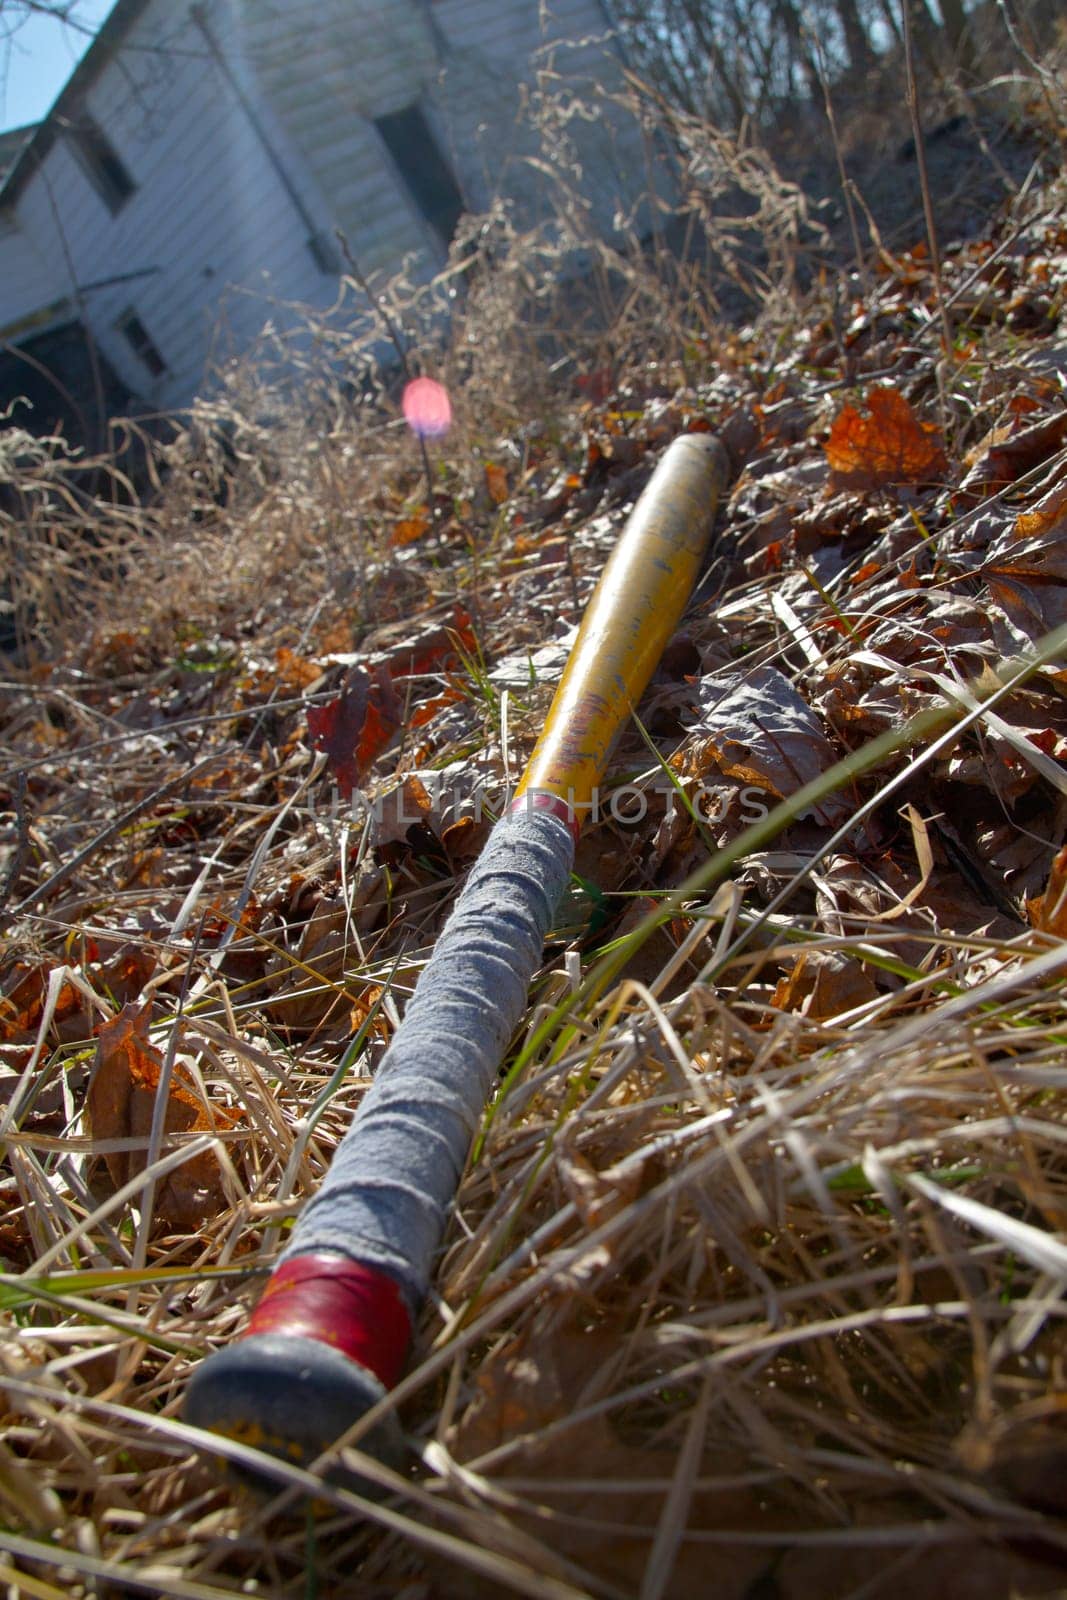 Vintage Baseball Bat on Autumn Field with Abandoned Building Background by njproductions